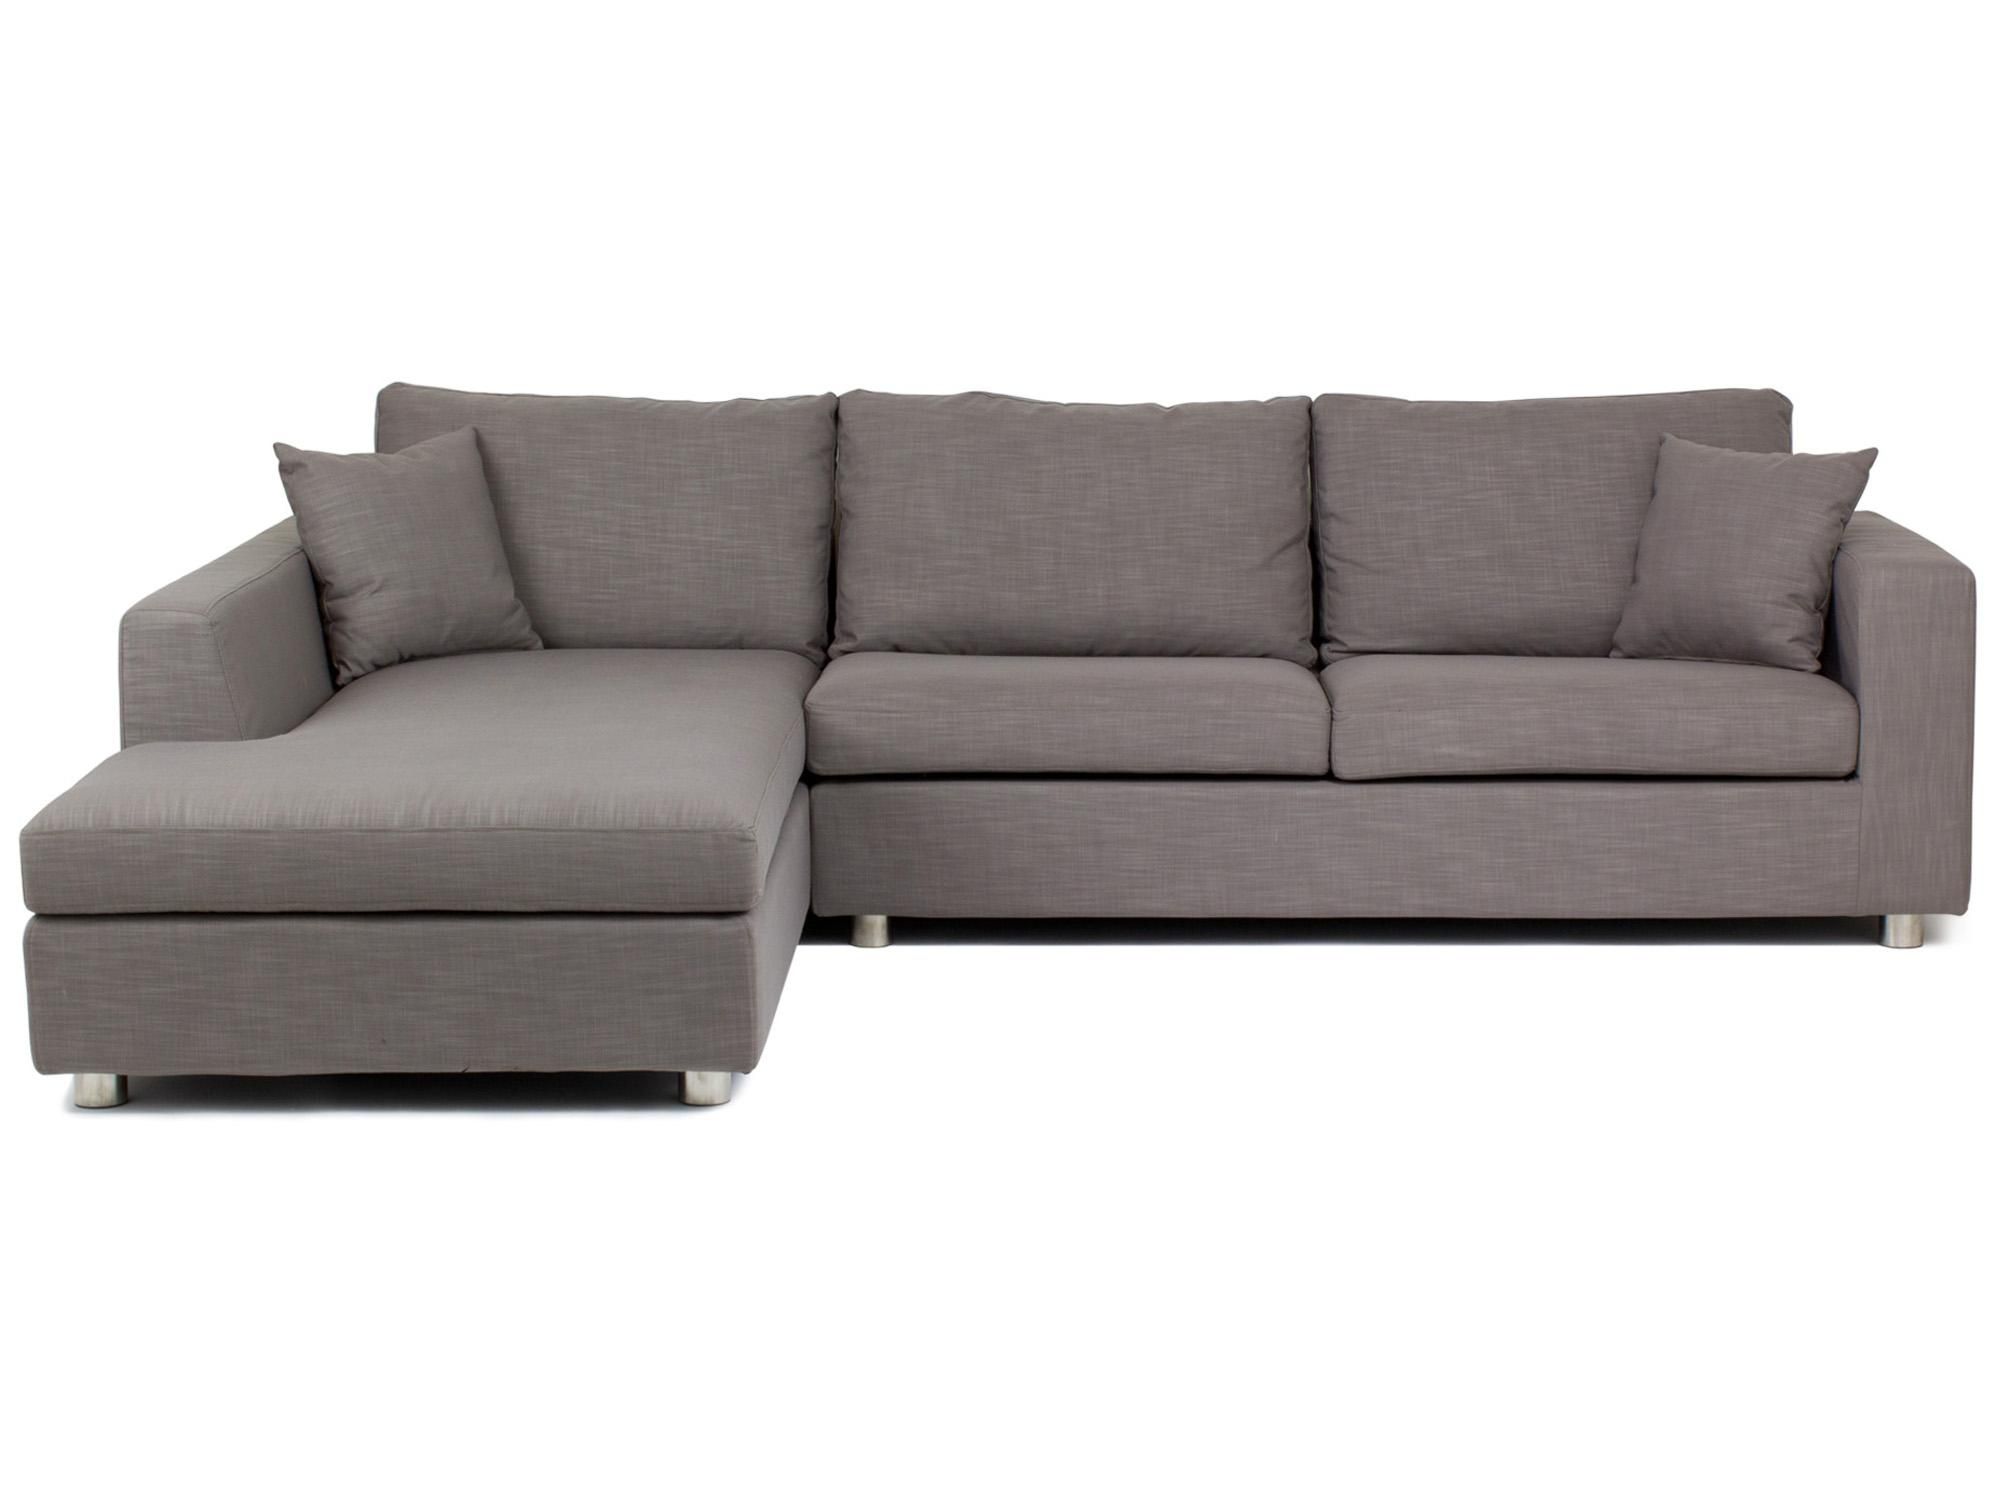 Mondo Storage – Corner Sofa Bed | Loungelovers With Chaise Longue Sofa Beds (View 10 of 20)